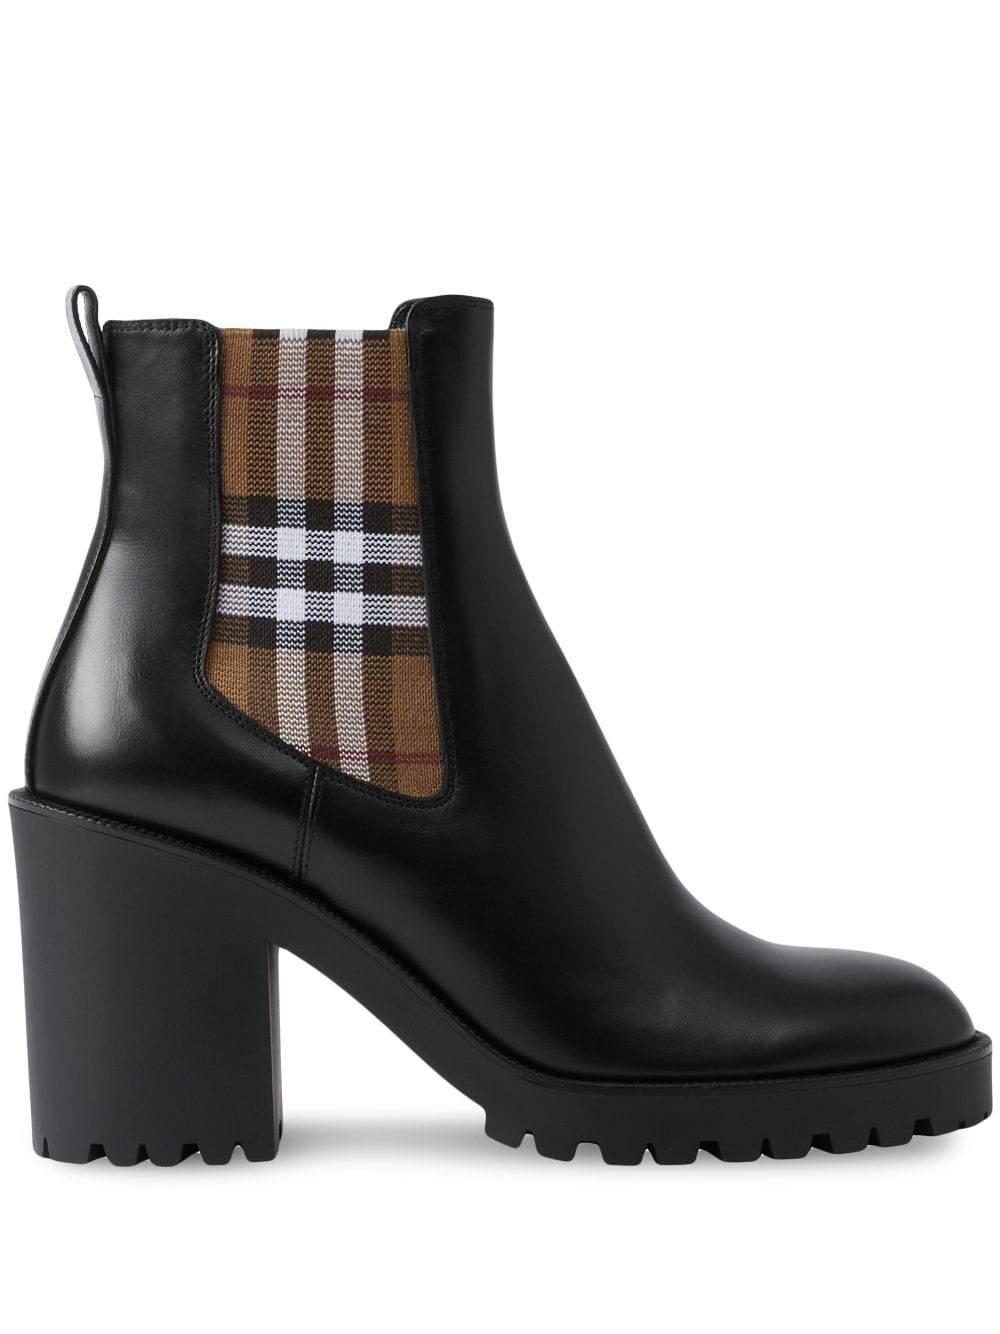 Burberry checkered panel ankle boots - Black von Burberry